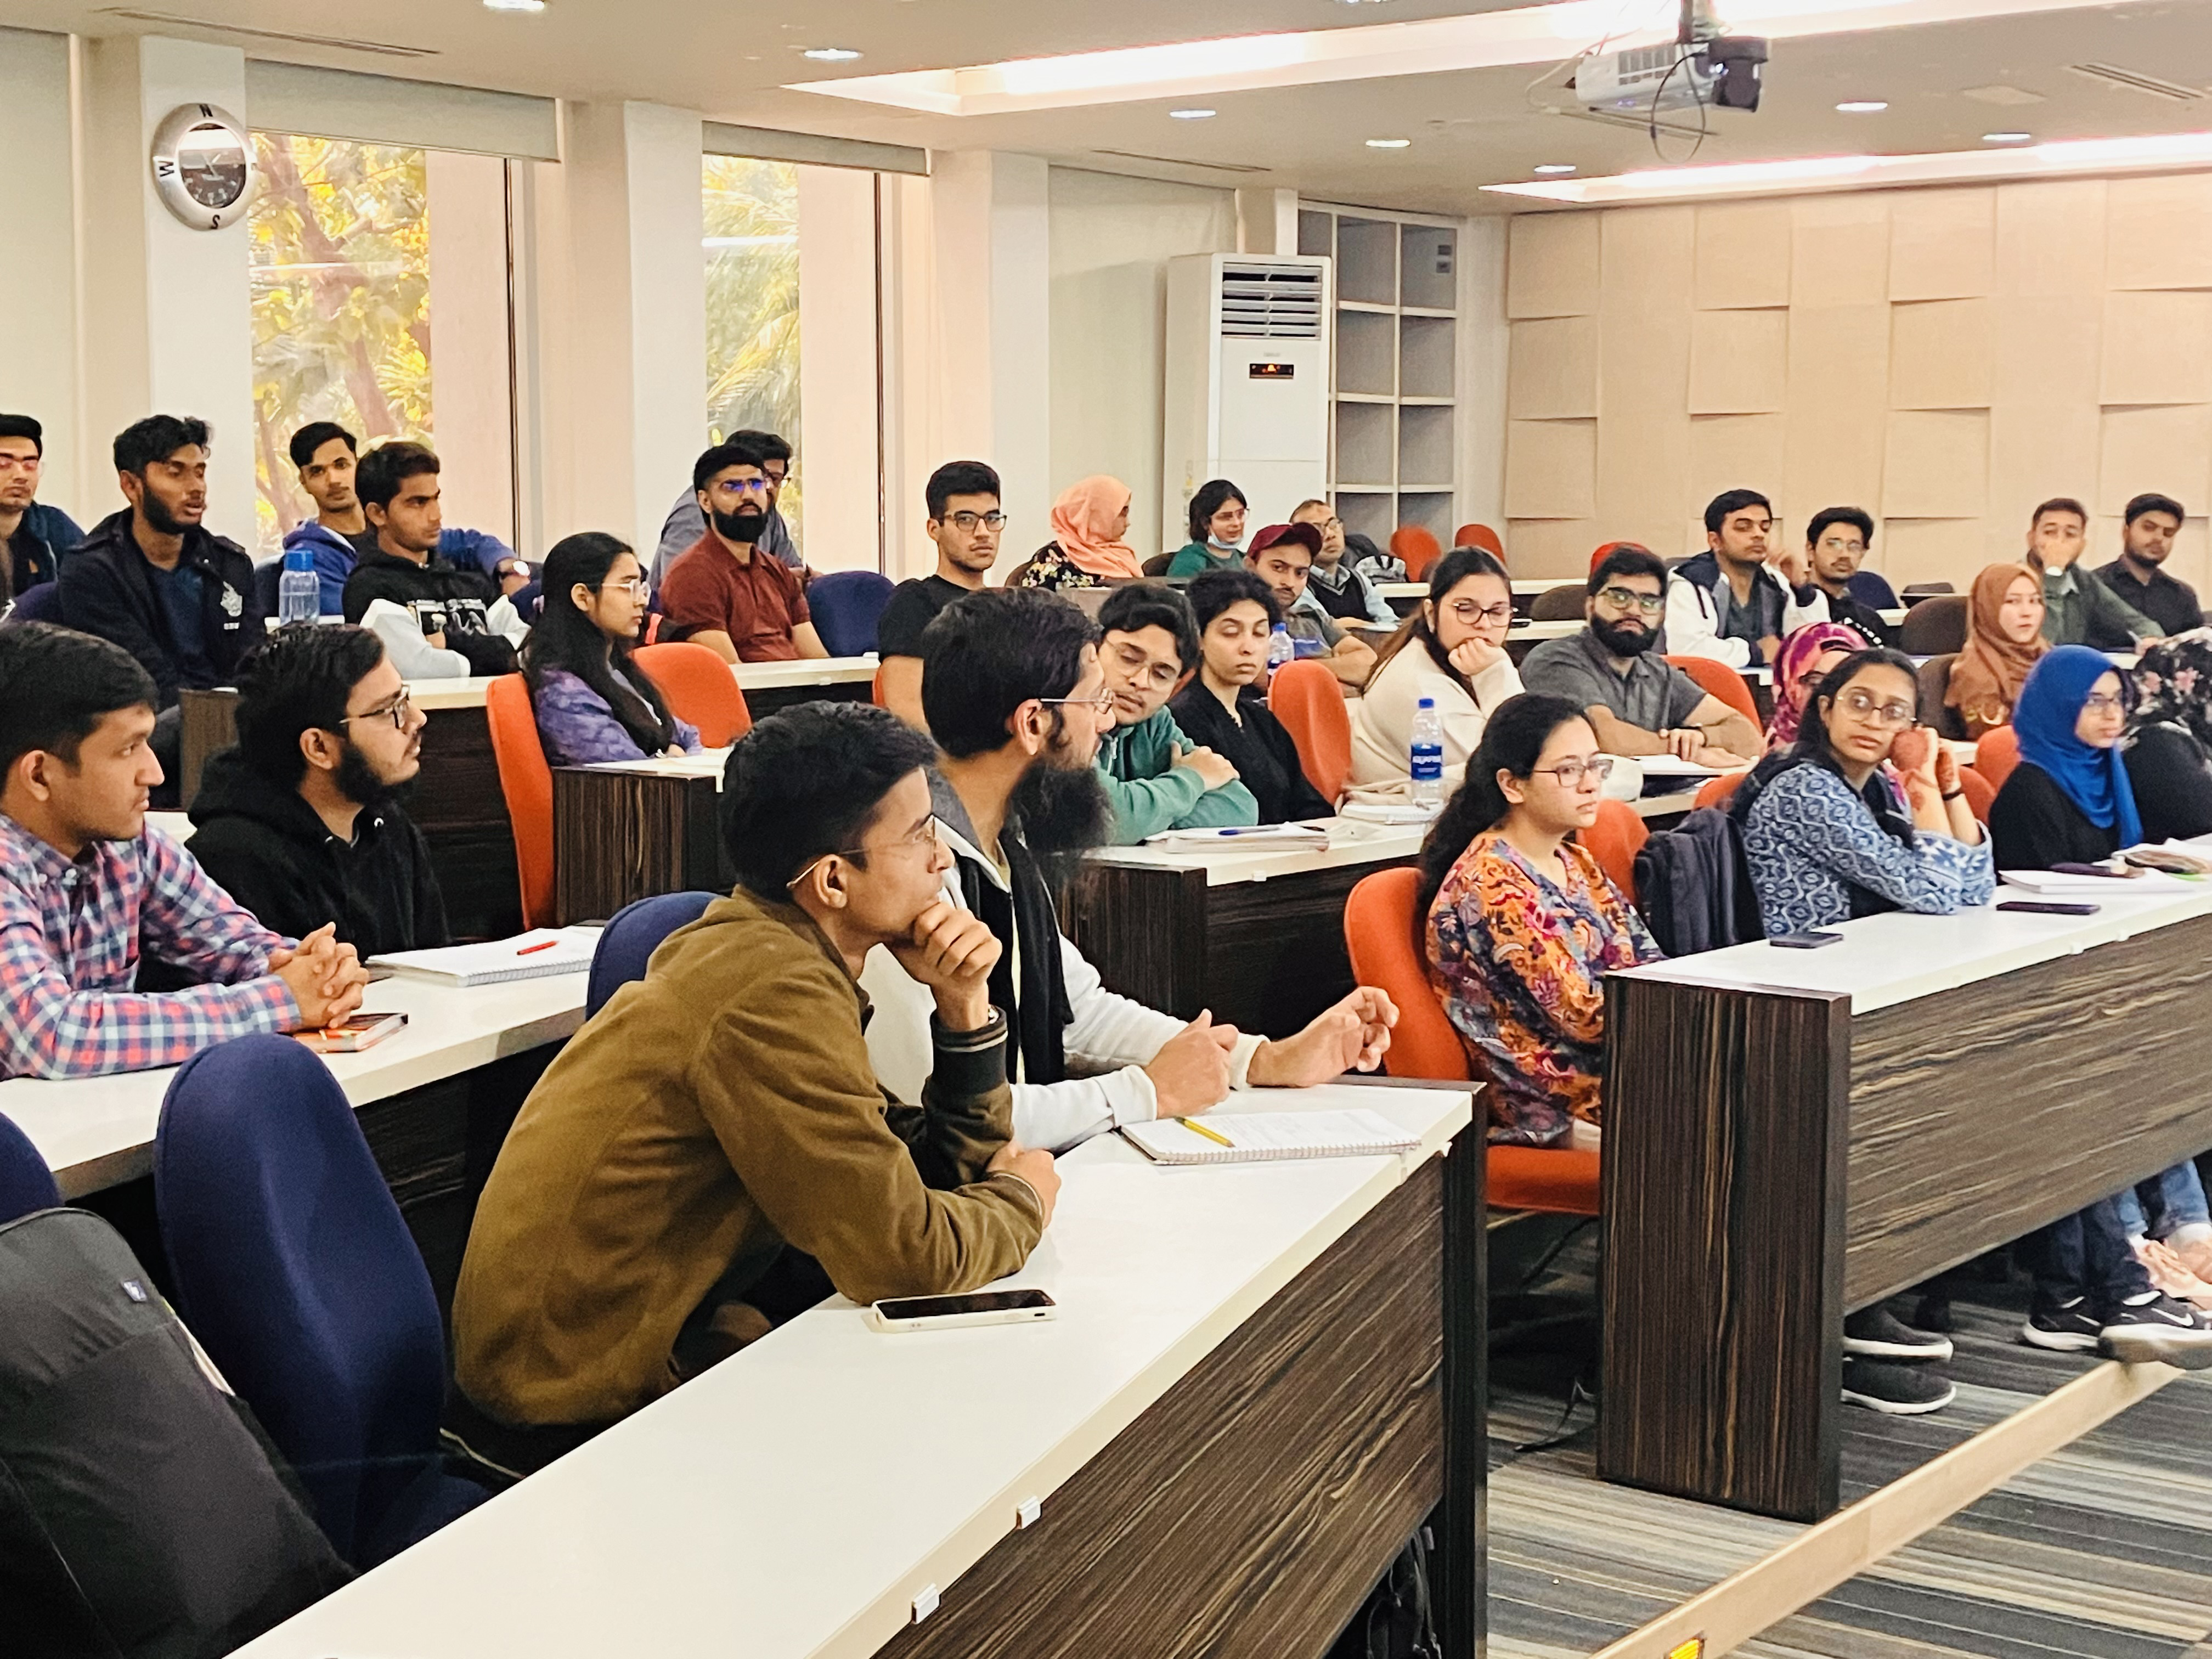 Data Science specialist enlightens students on career prospects in the tech industry